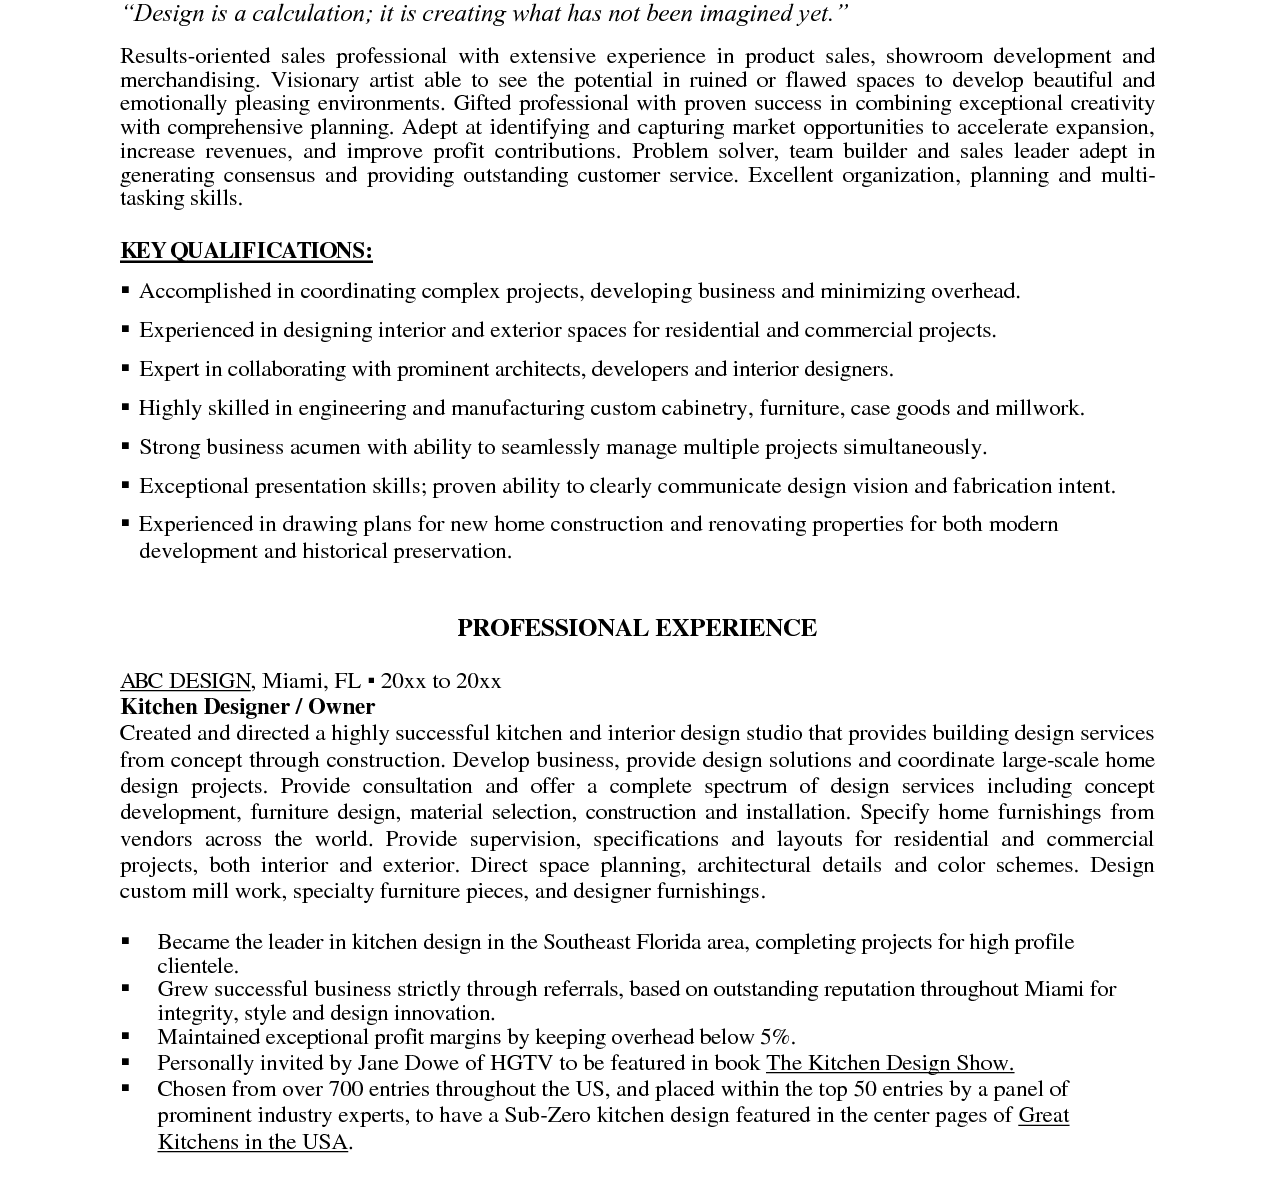 Resume Templates For Kitchen Manager  